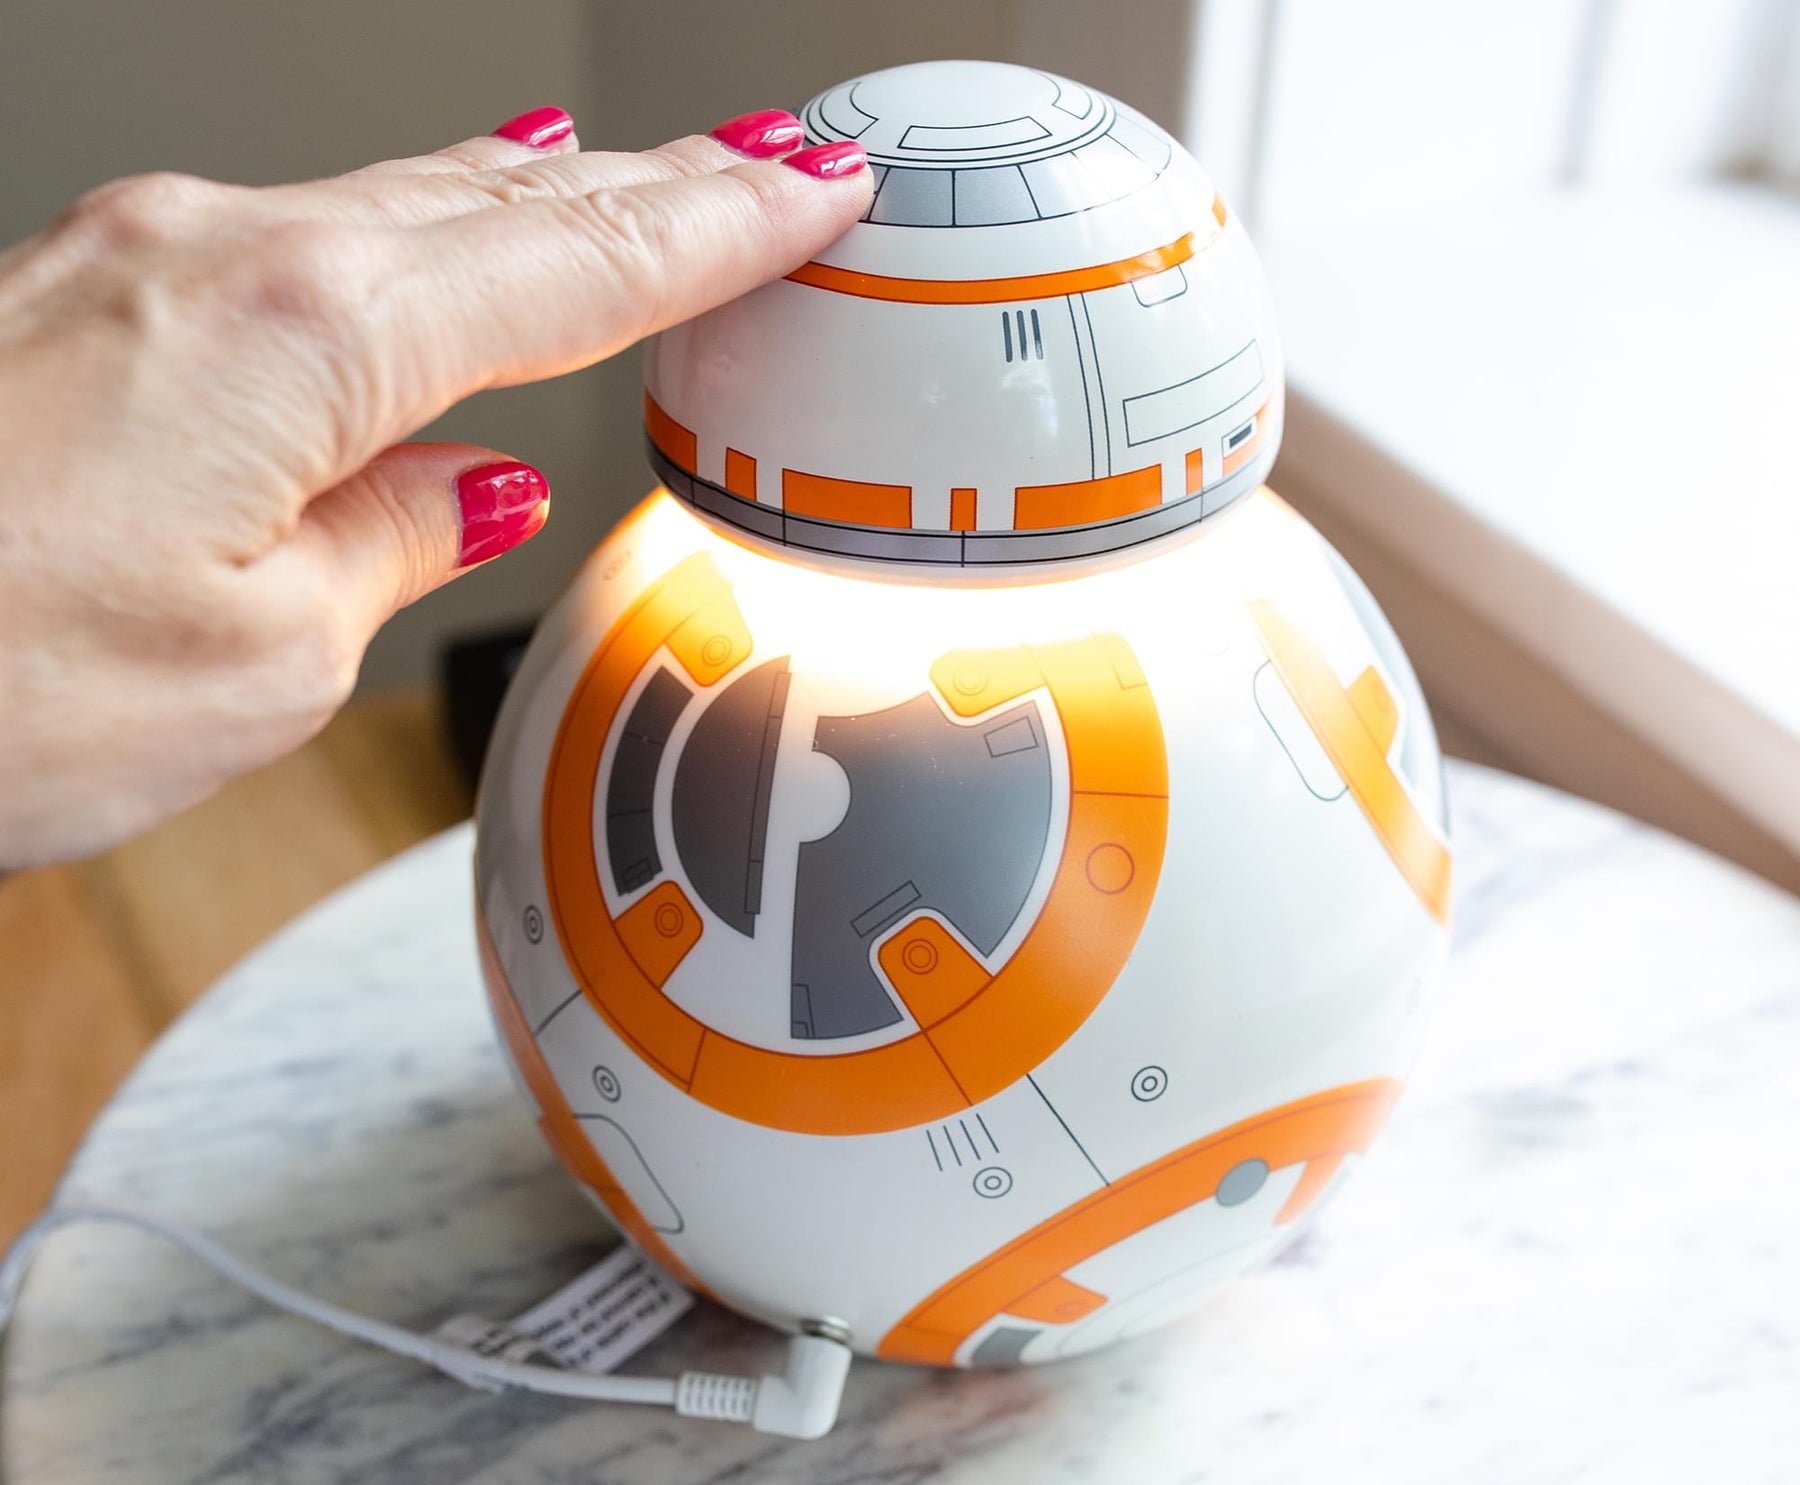 Star Wars BB-8 Figural Touch Mood Light | 8 Inches Tall